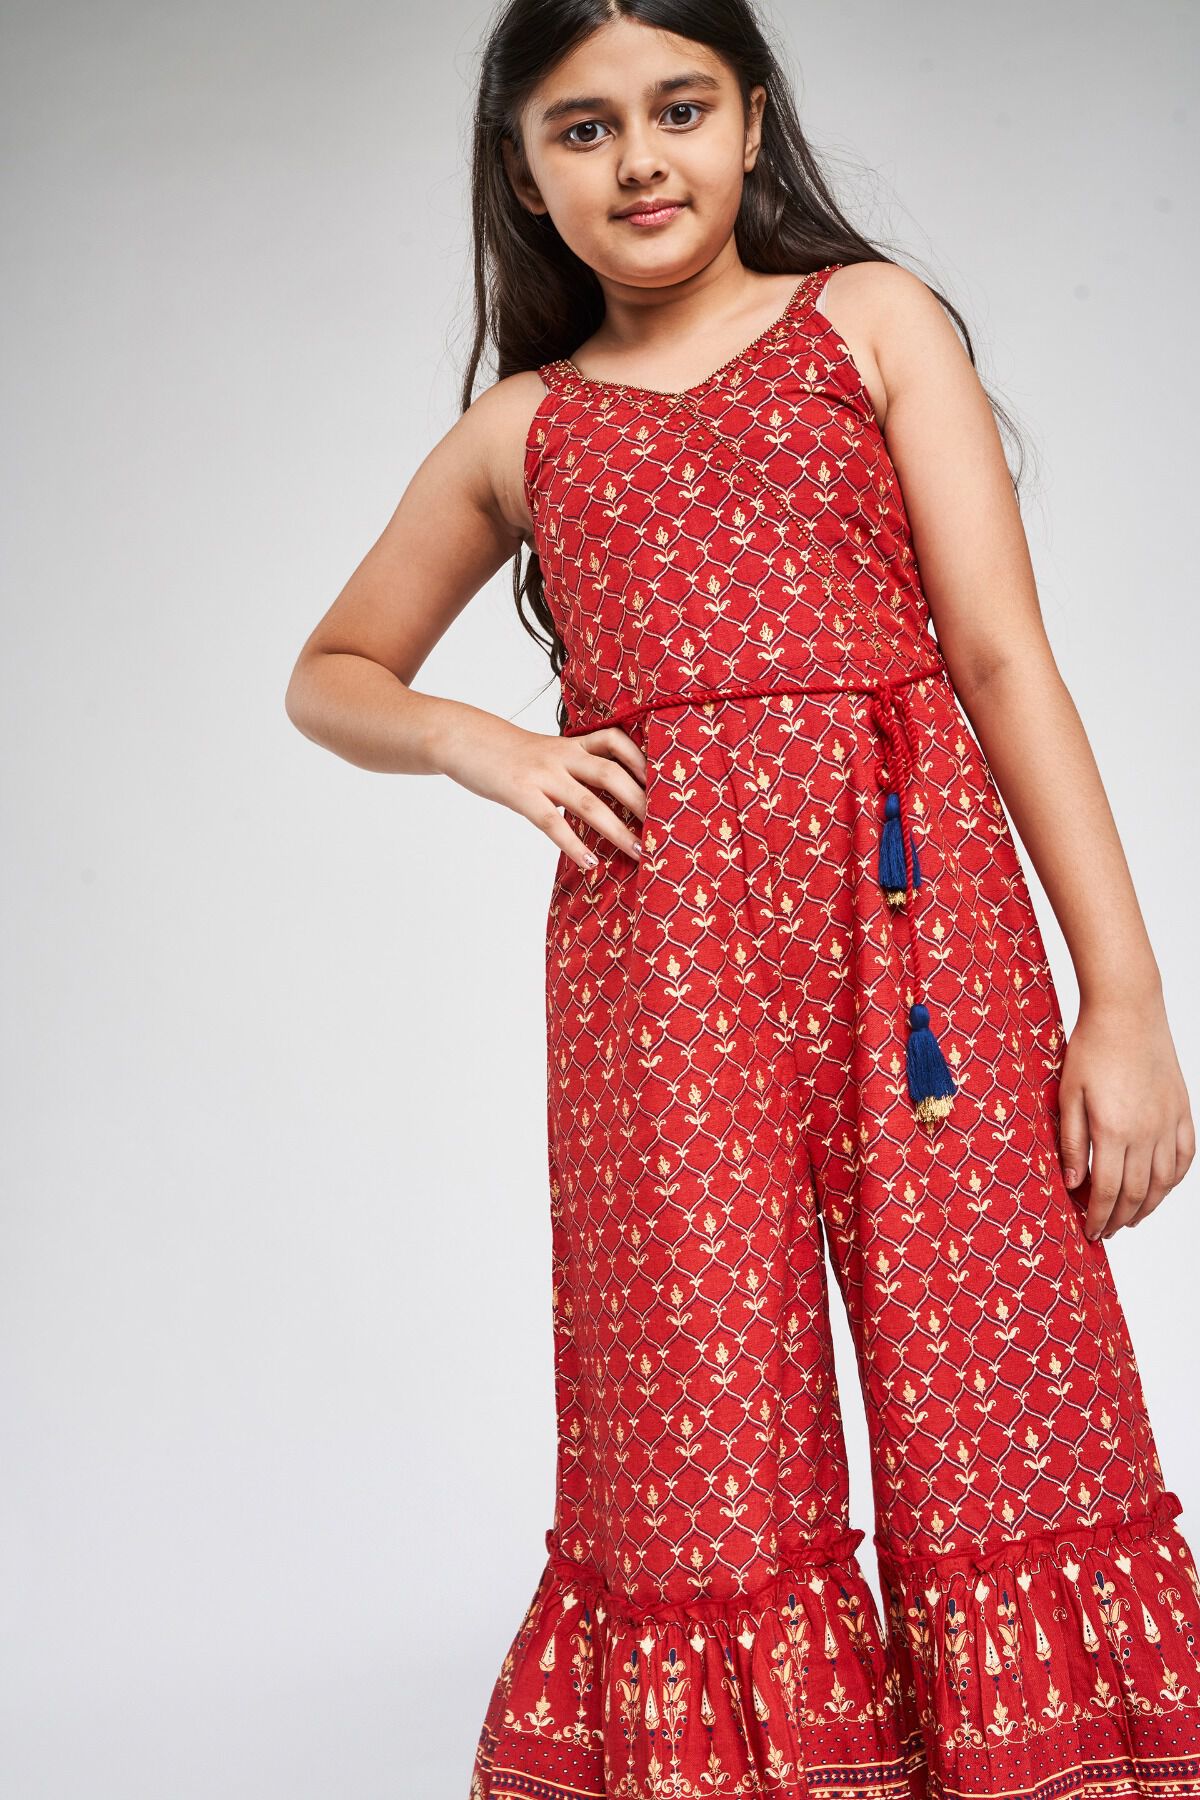 Girls Jumpsuits- Explore Ethnic Jumpsuits for Girls | Global Desi